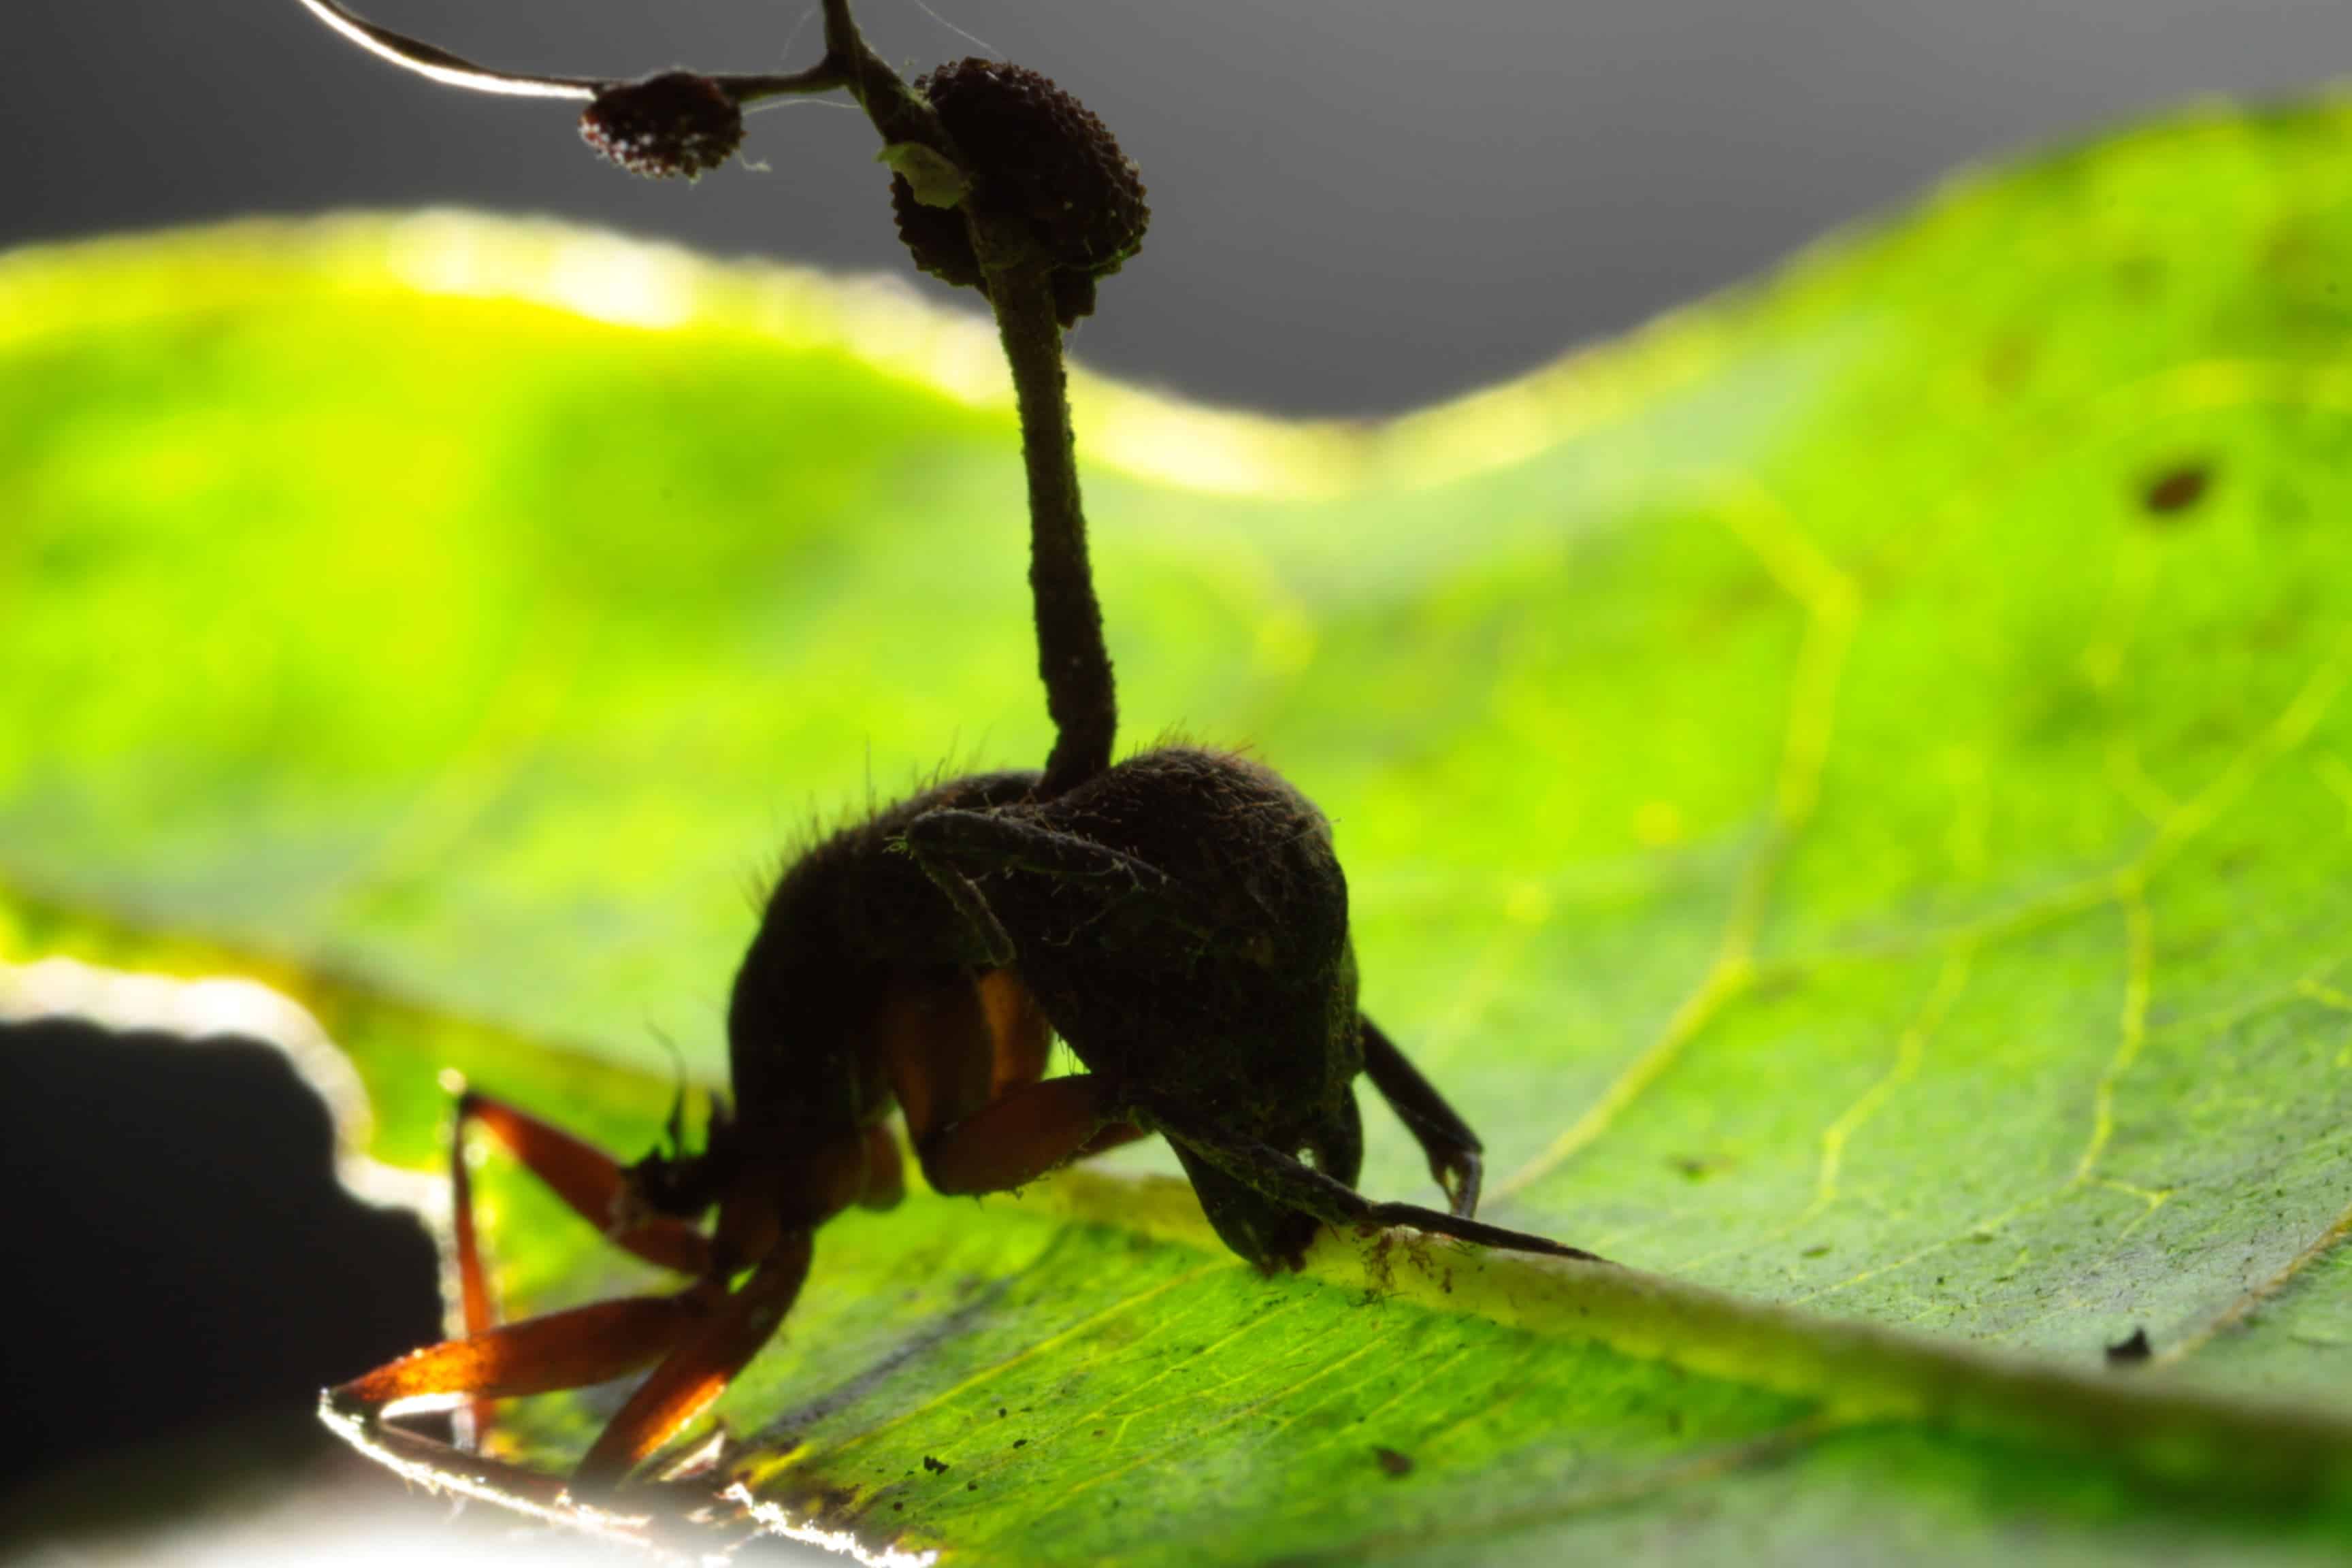 This is a carpenter ant in the tropical rain forest manipulated by fungus to bite onto a leaf up high in the vegetation. Image credits: David Hughes, Penn State.